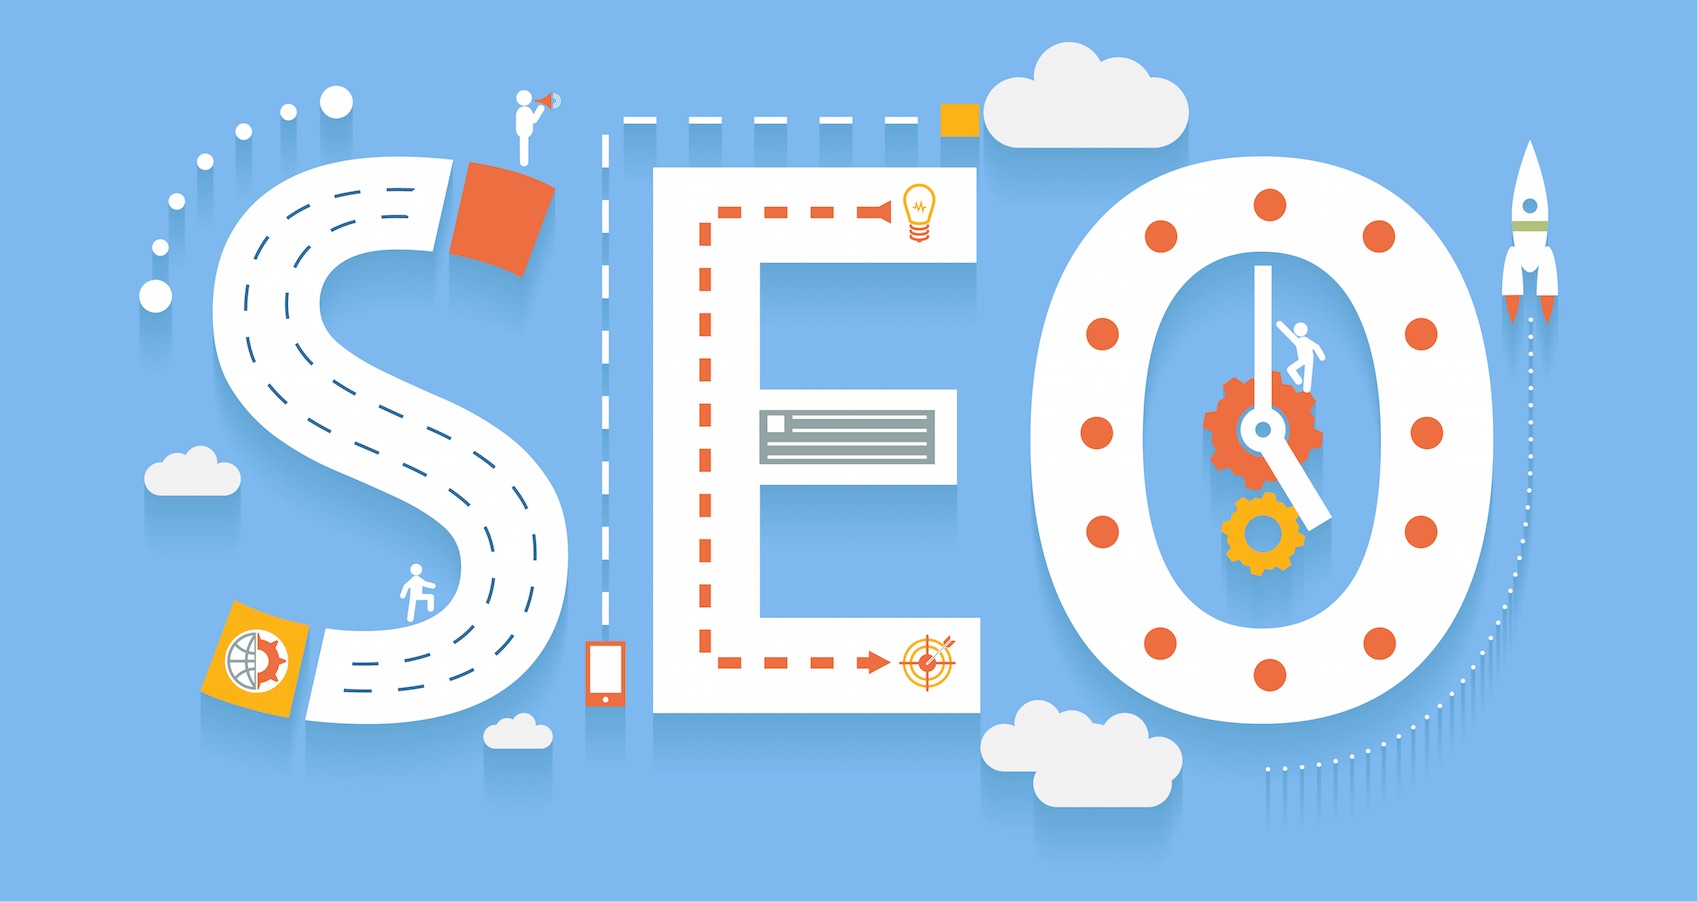 what is SEO?